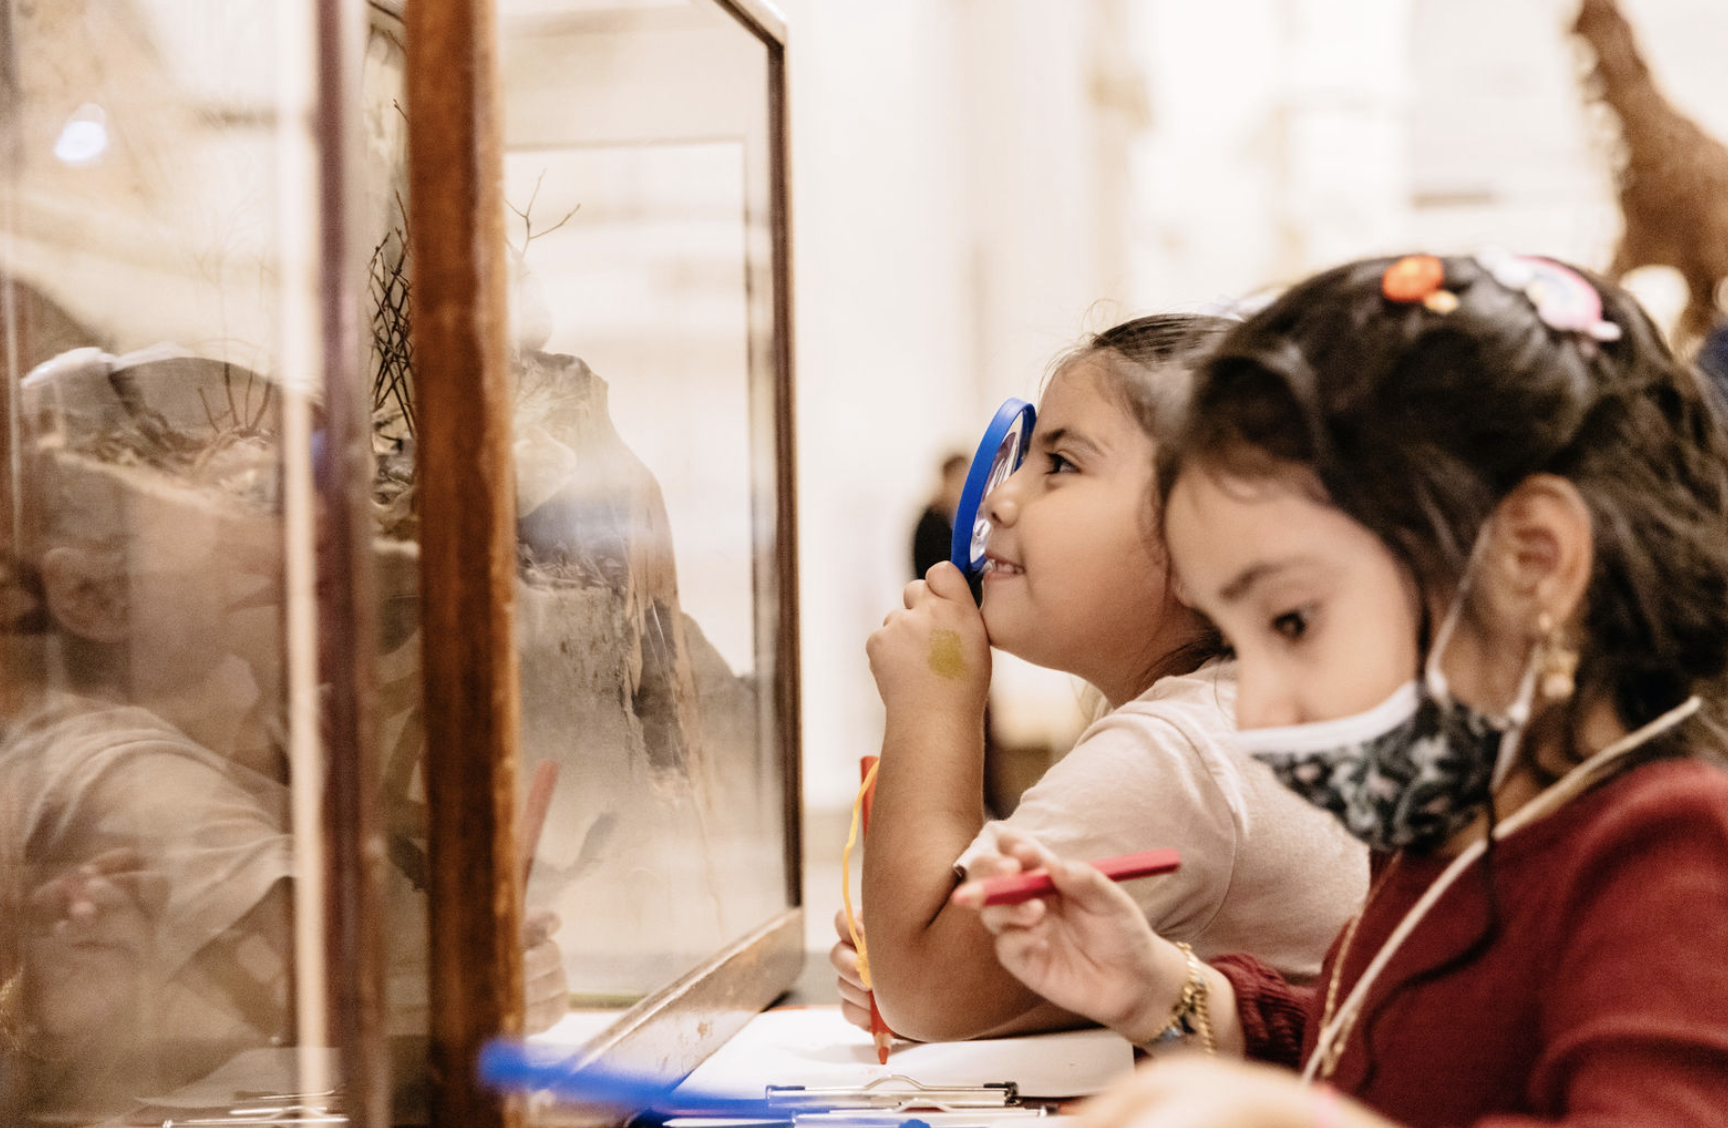 two children at a museum display case, one looking in with a magnifying glass, the other with a notebook and pencil.